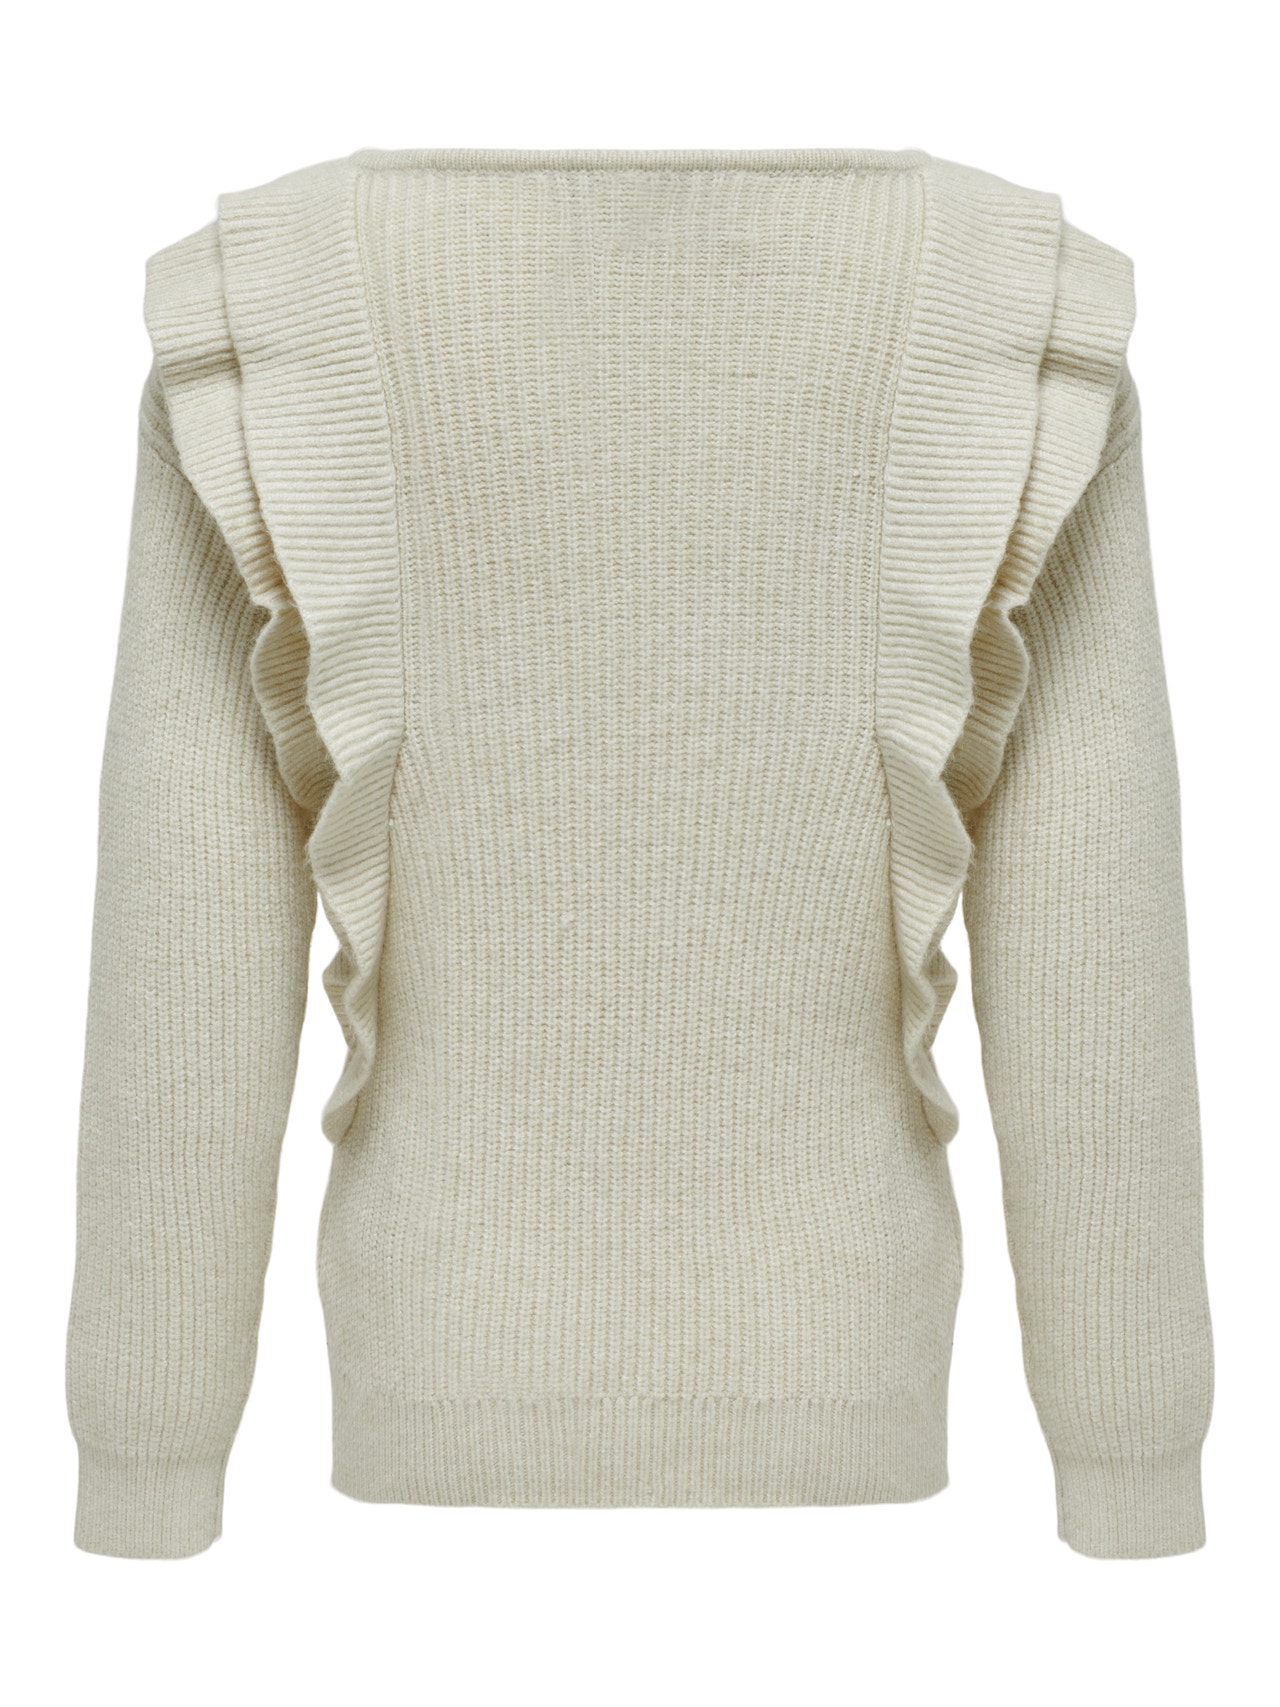 ONLY Knit Pullover With Ruffles -Pumice Stone - 15276092